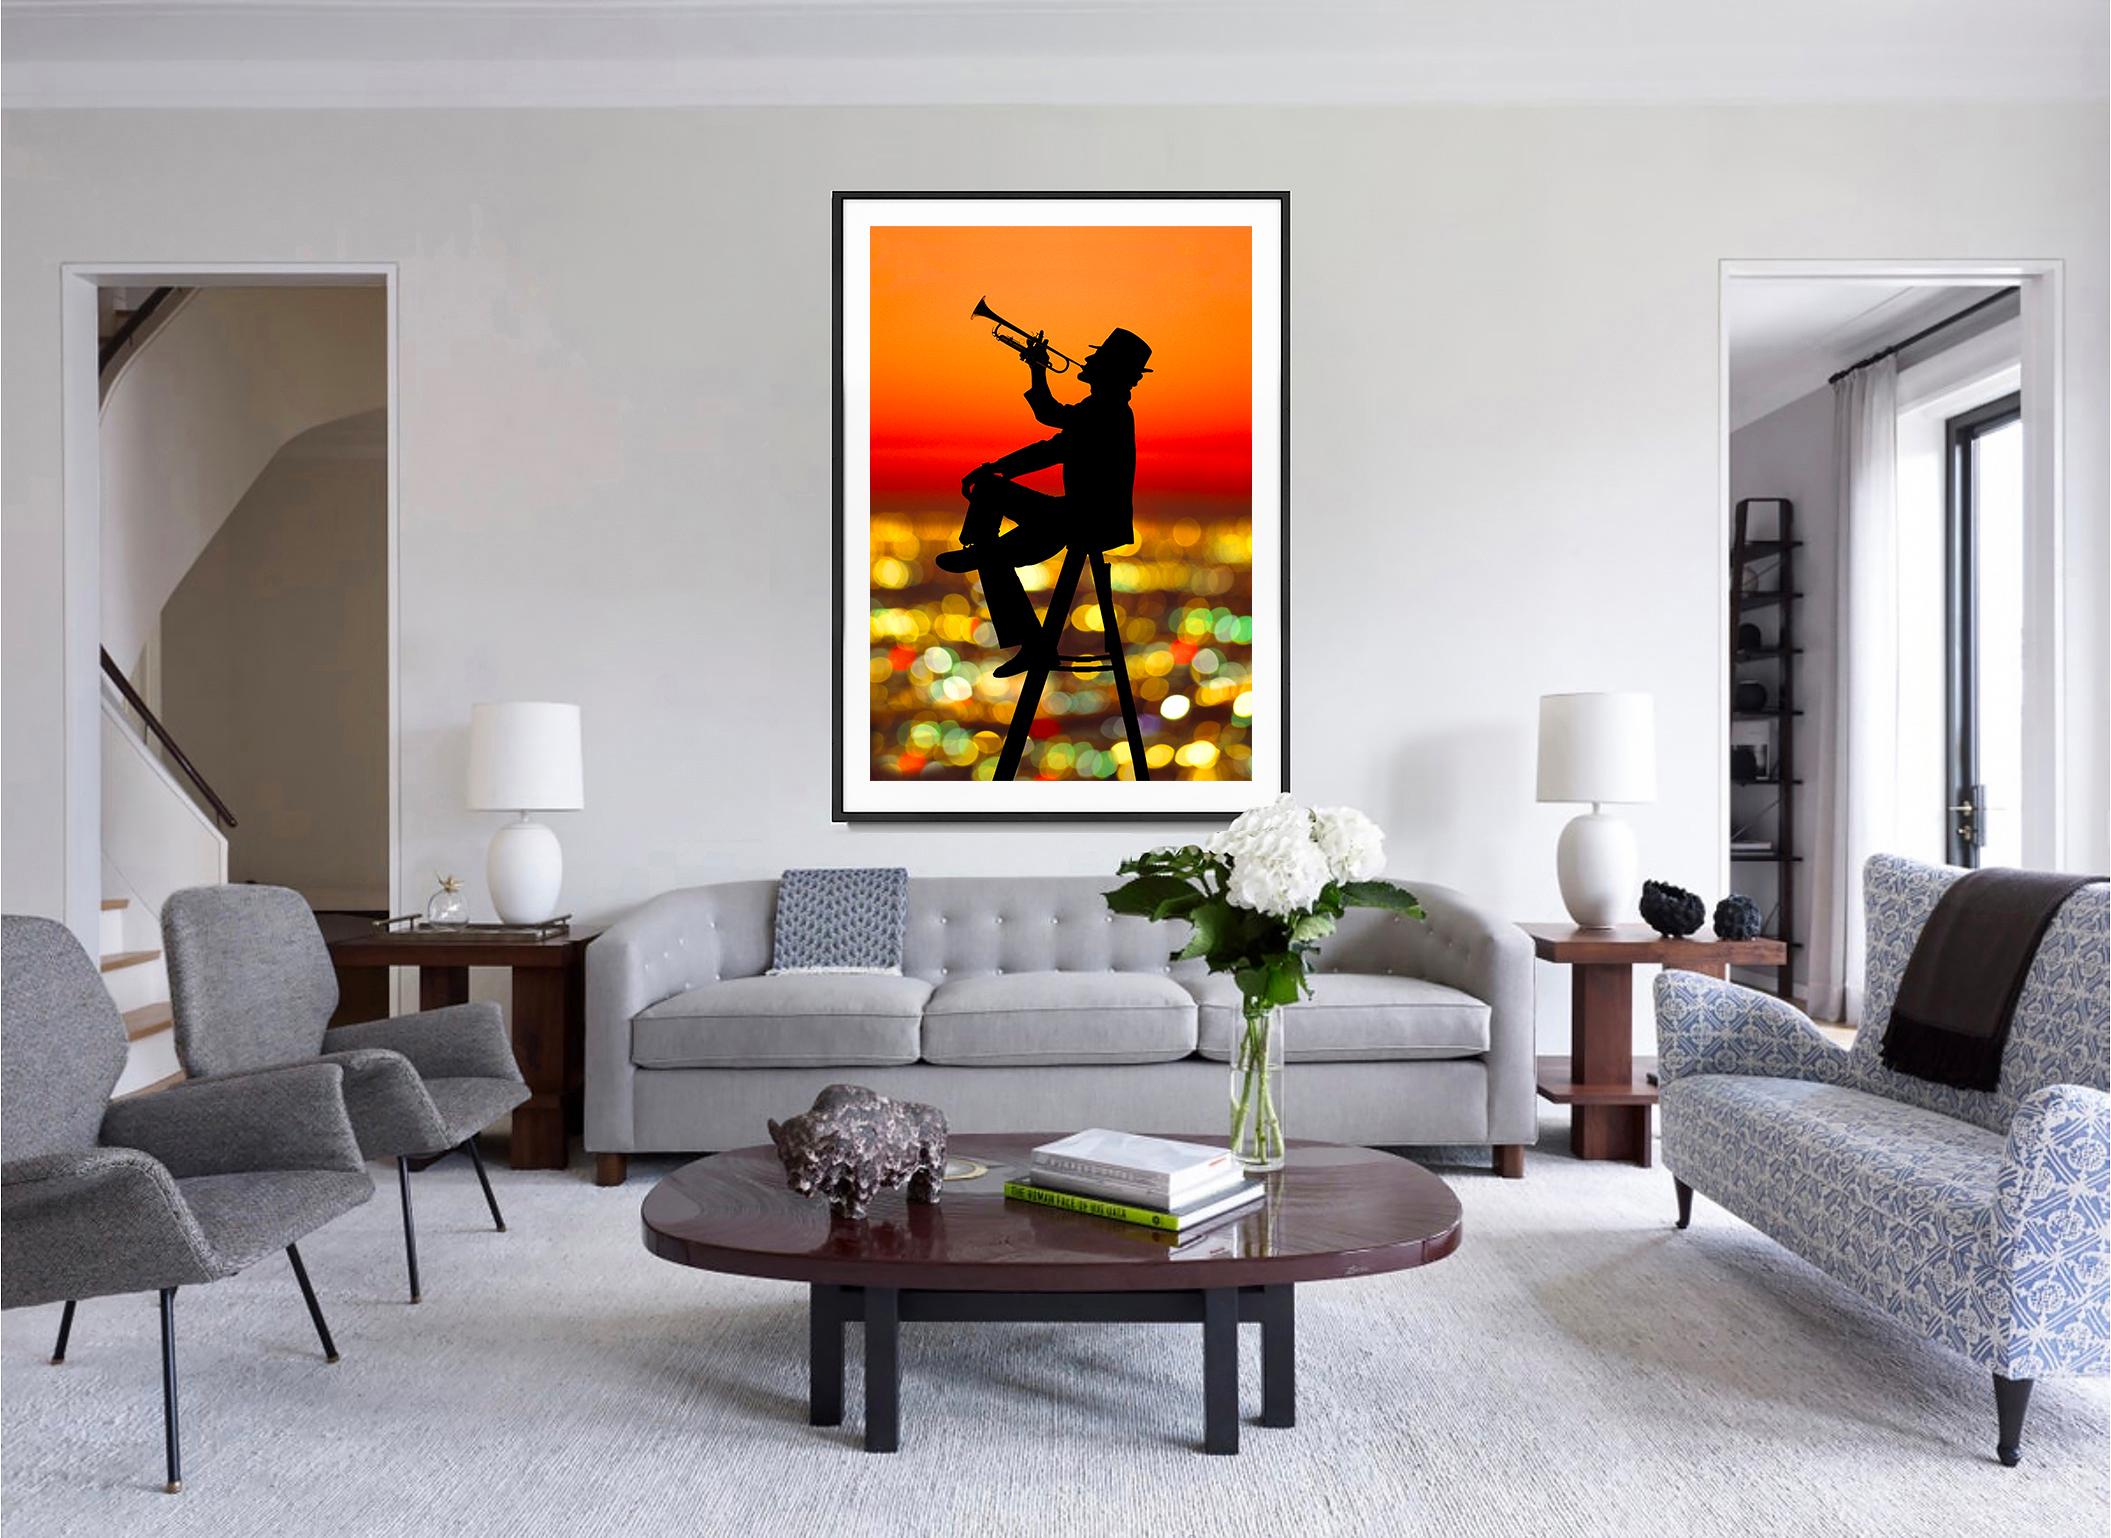 Joyful Jazz Trumpet Player in Silhouette Floating  Orange Sunset Los Angeles - Contemporary Photograph by Mitchell Funk